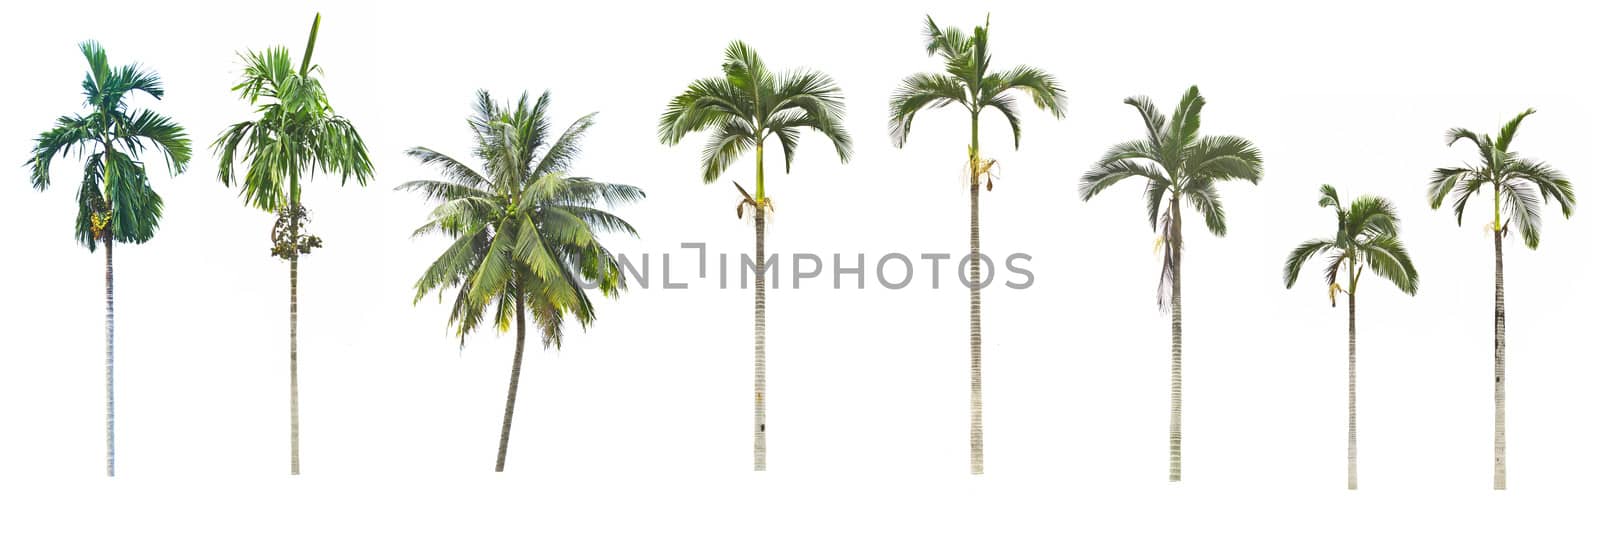 Set of palm and coconut trees on white background 